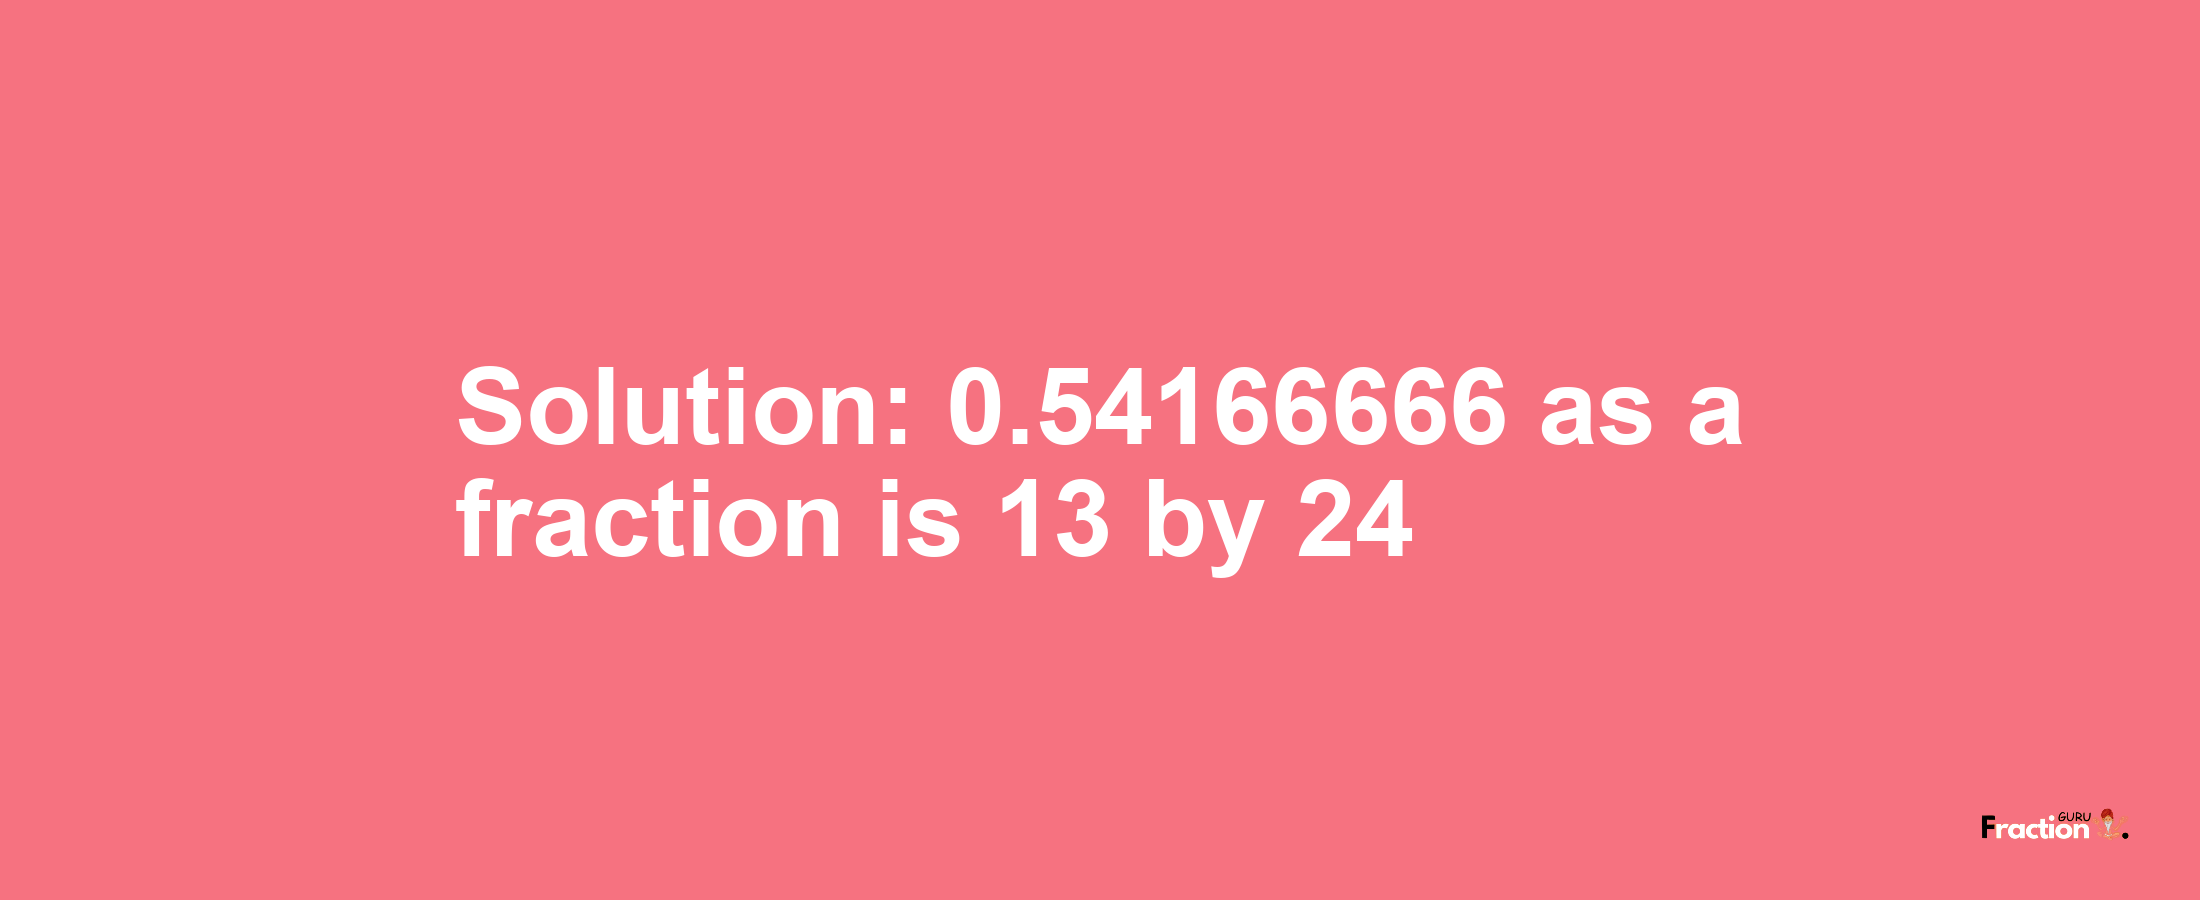 Solution:0.54166666 as a fraction is 13/24